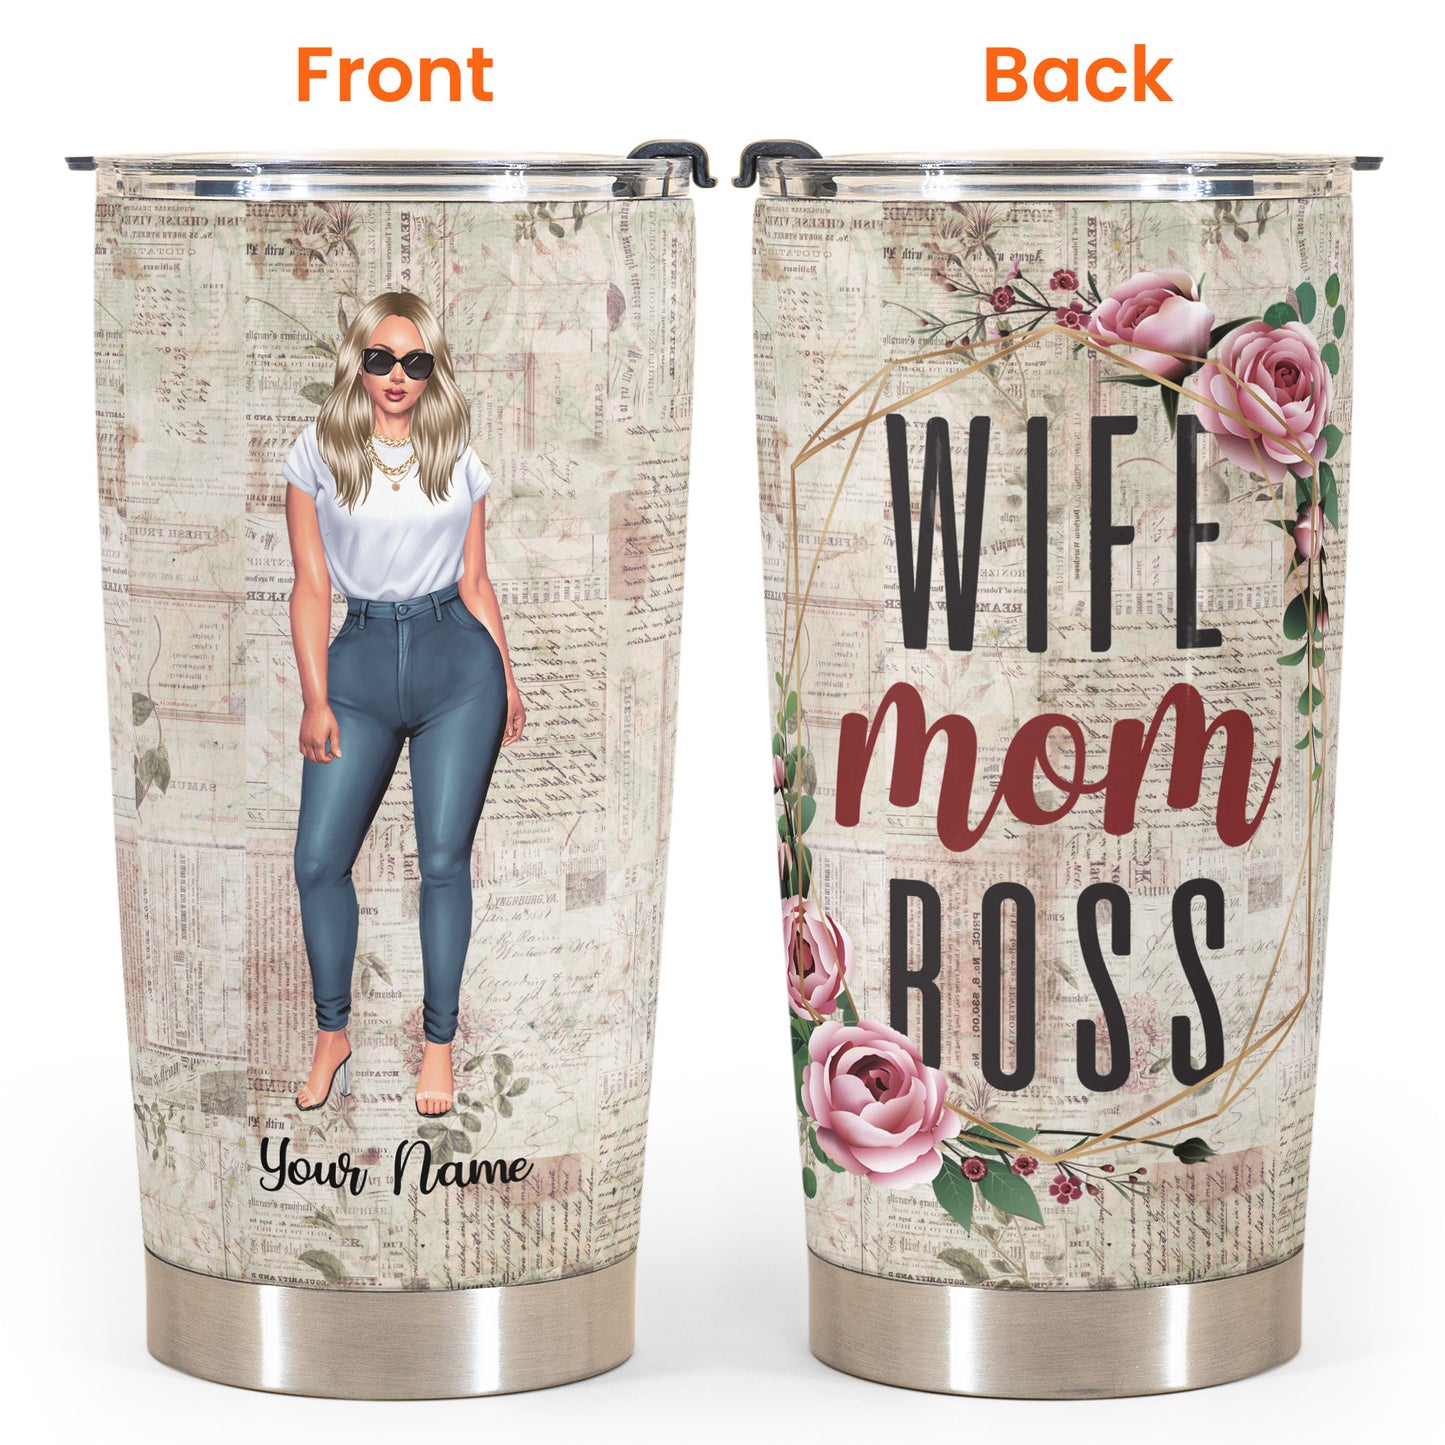 Wife Mom Boss - Personalized Tumbler Cup - Valentine's Day, Birthday Gift For Wife, Mom